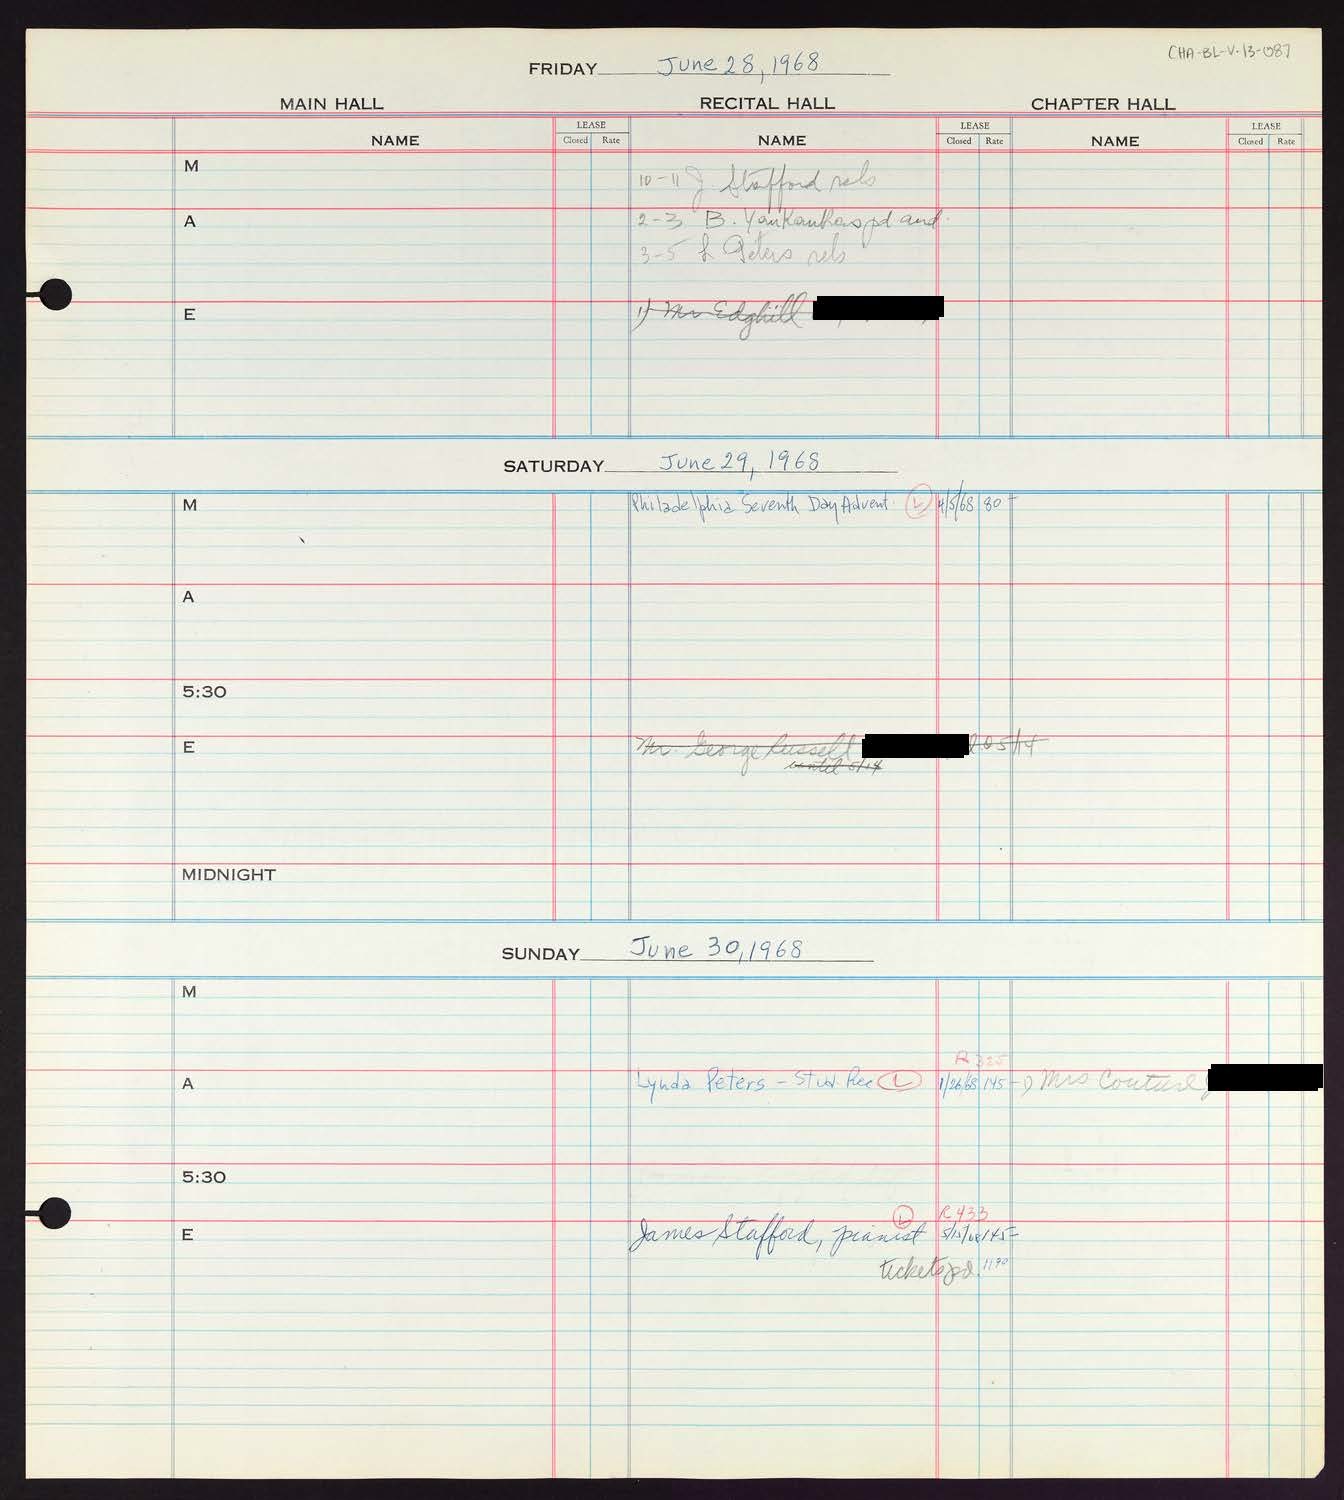 Carnegie Hall Booking Ledger, volume 13, page 87